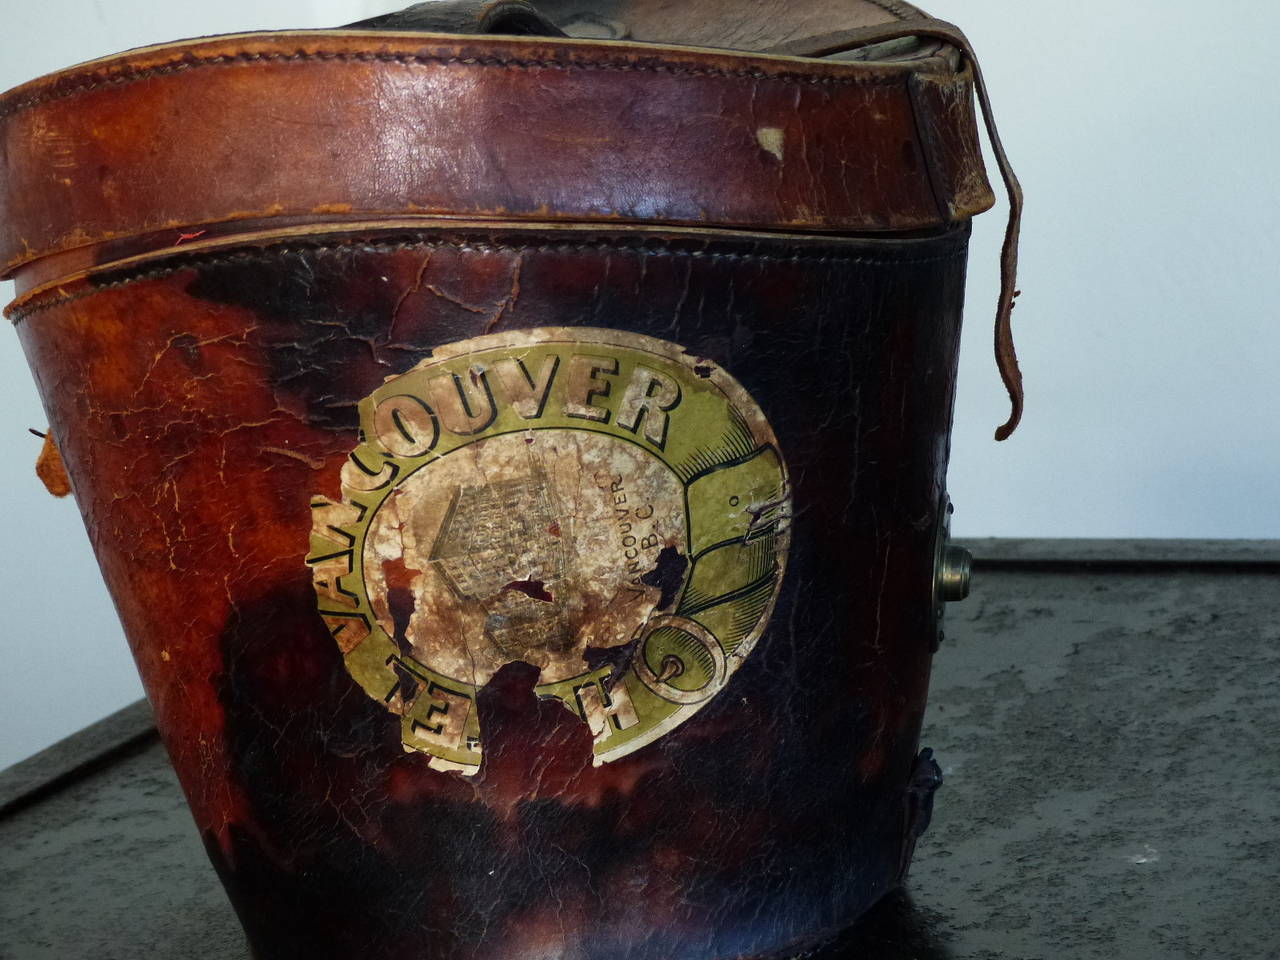 Antique leather hat box with excellent patina and large Vancouver, Canada shipping stamp. Untouched condition, with red satin lining.